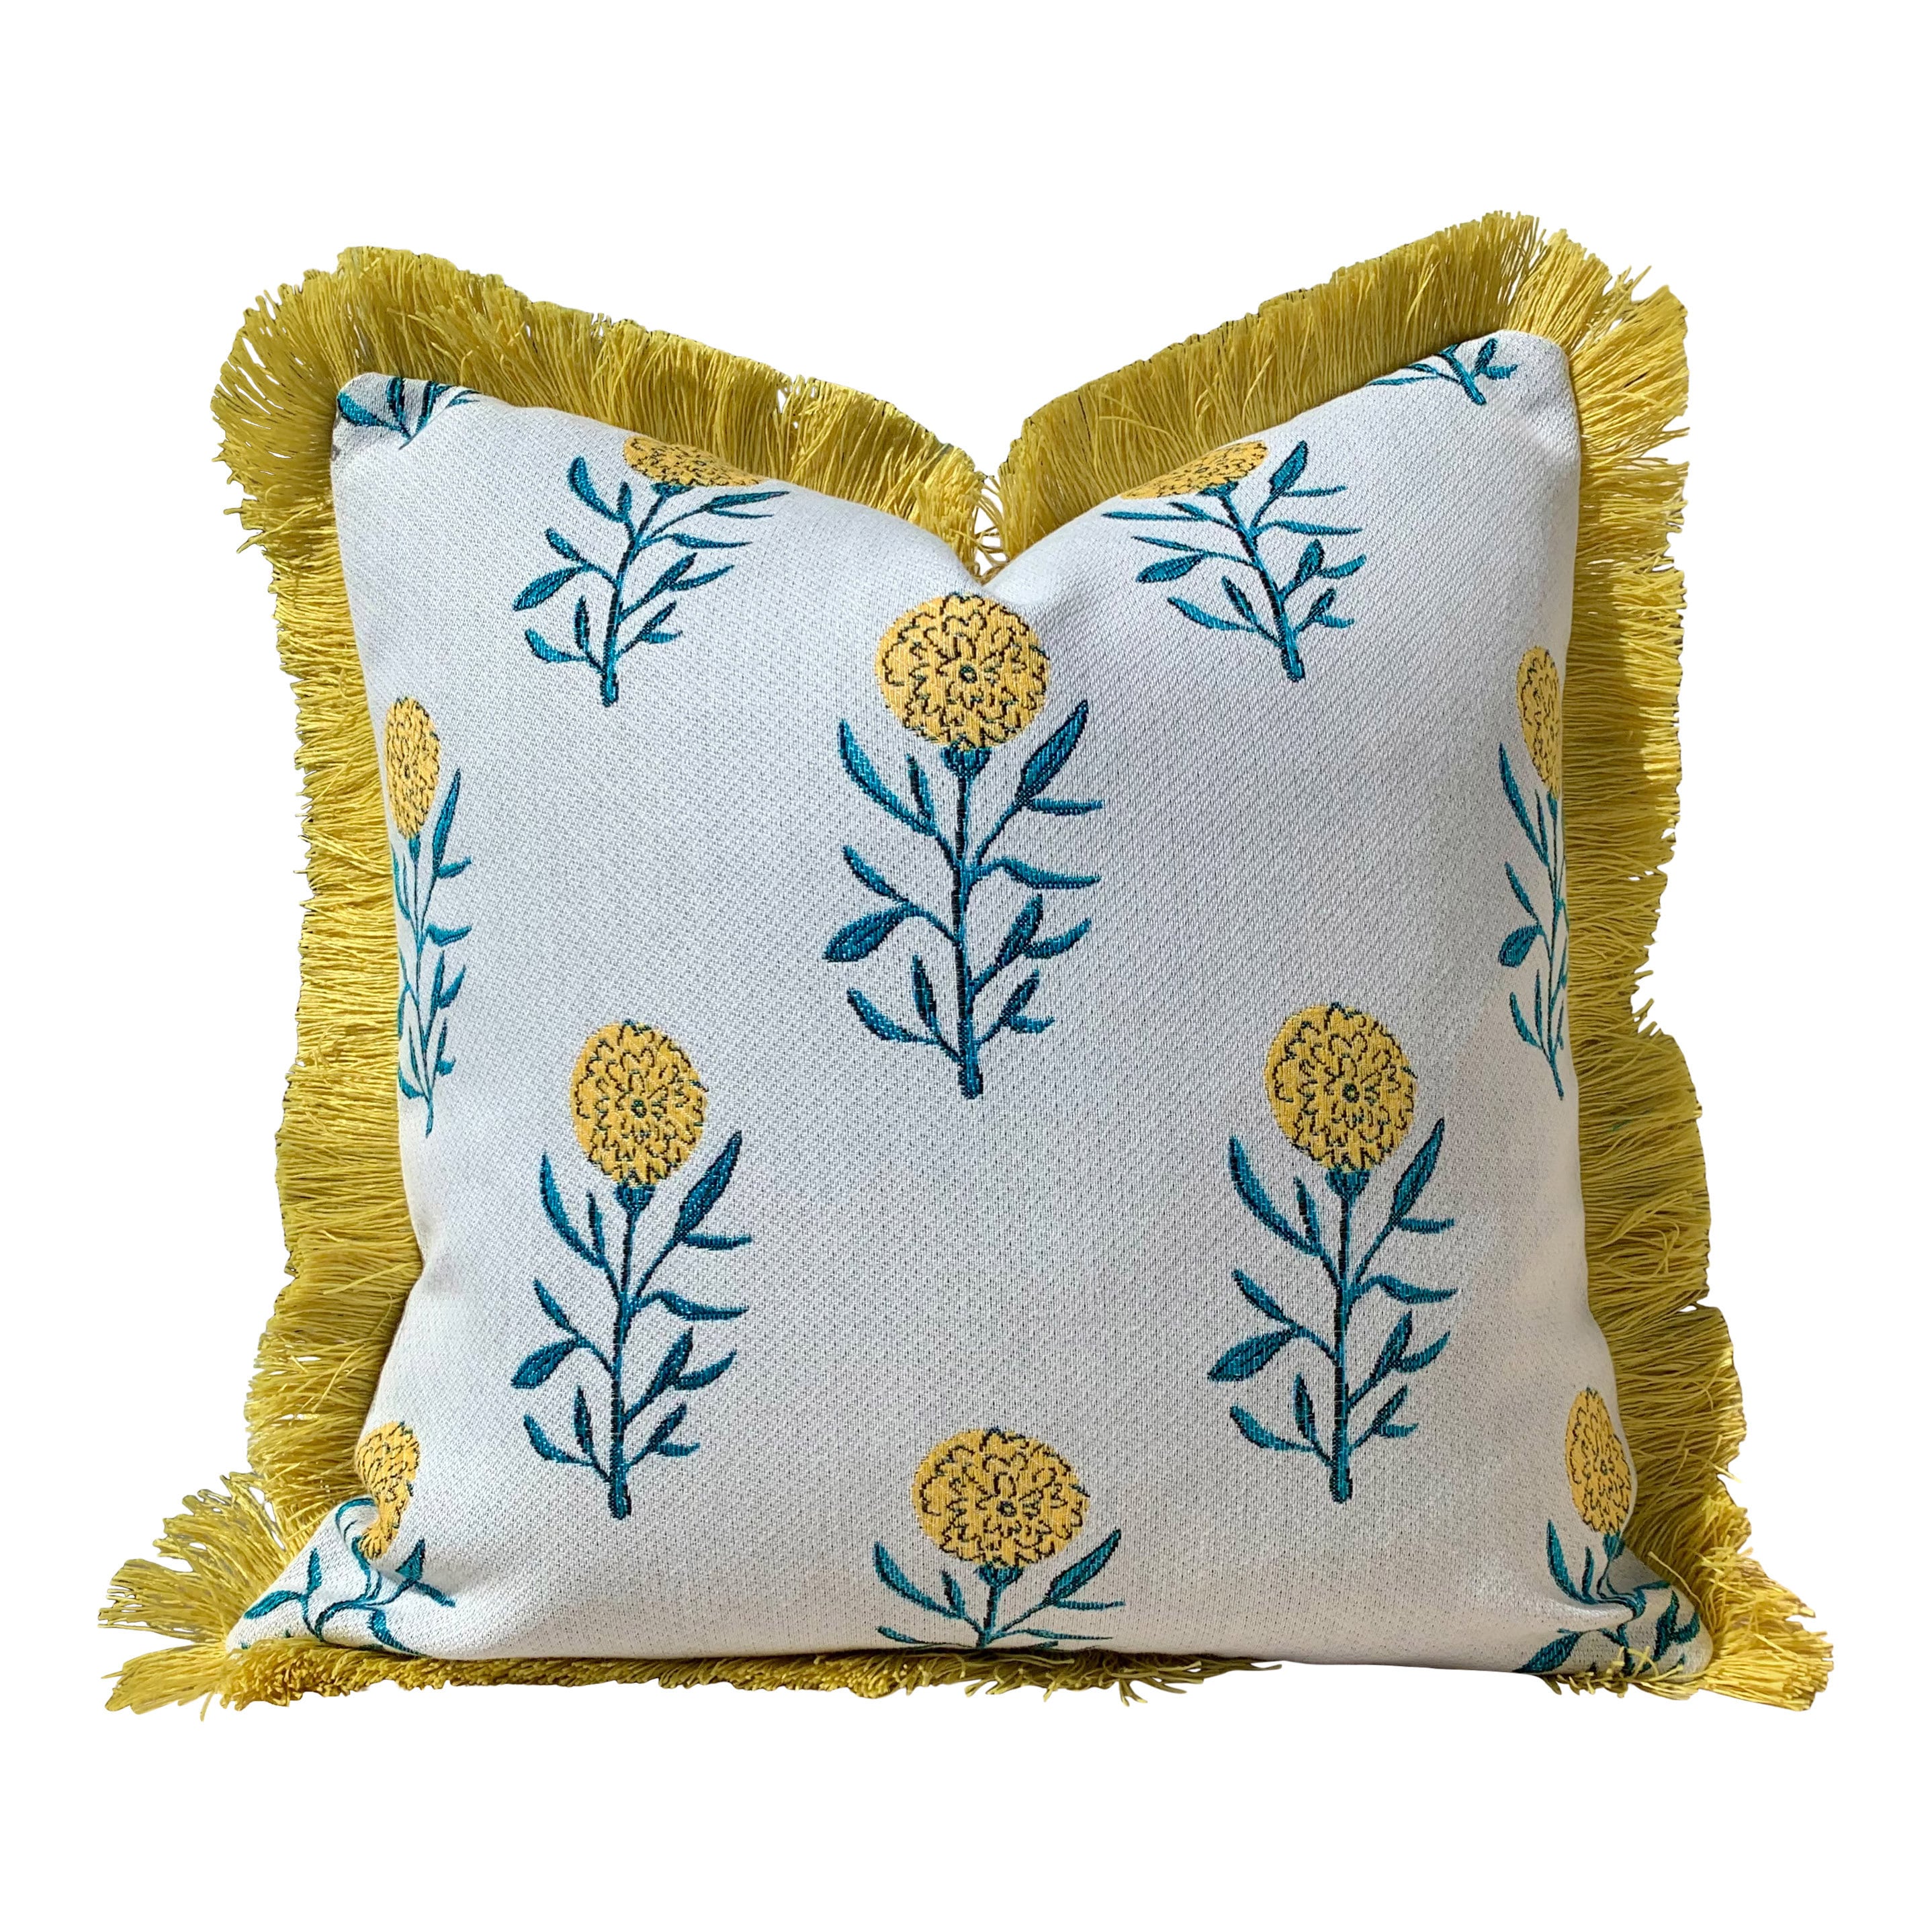 Outdoor Floral Pillow in Yellow and Teal. Accent Lumbar pillow, Sunbrella Pillow with Brush Fringe, Euro Sham Decorative Pillow Cover